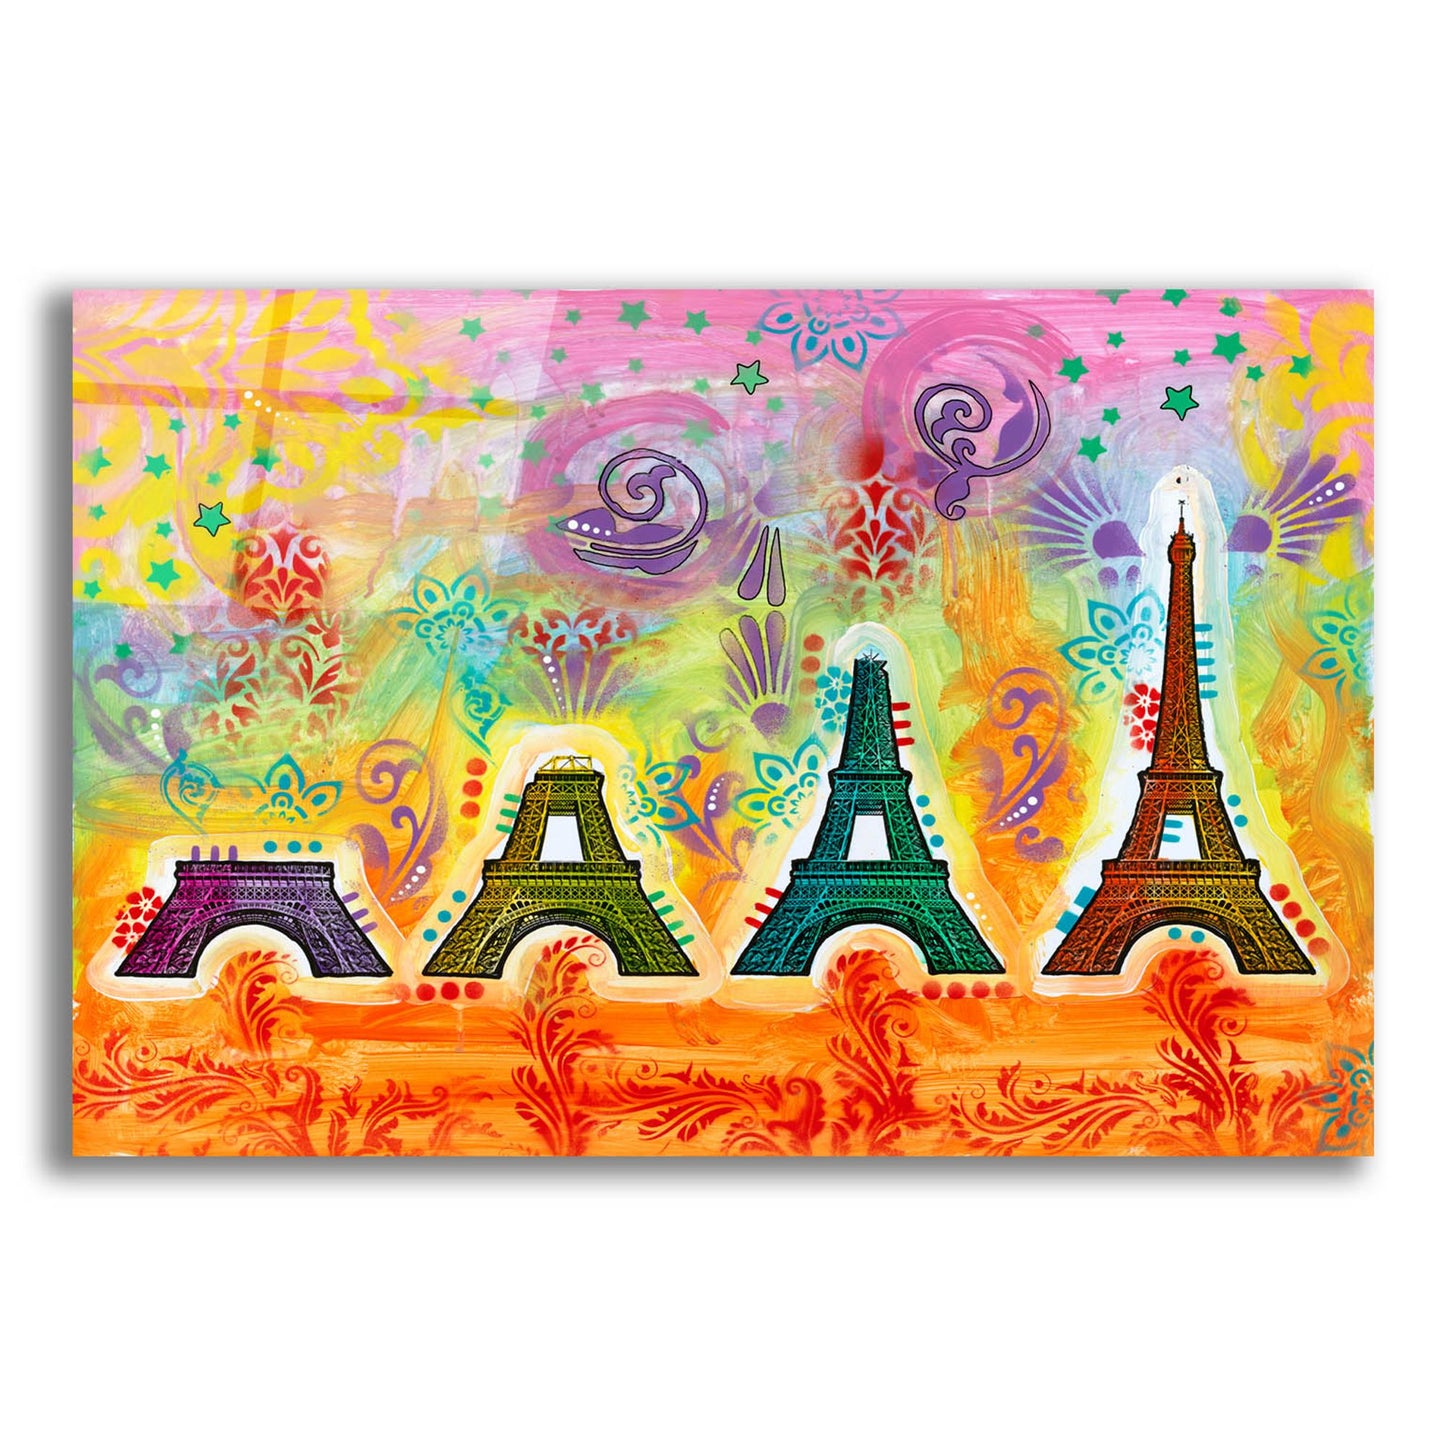 Epic Art 'Construction of the Eiffel Tower' by Dean Russo, Acrylic Glass Wall Art,24x16